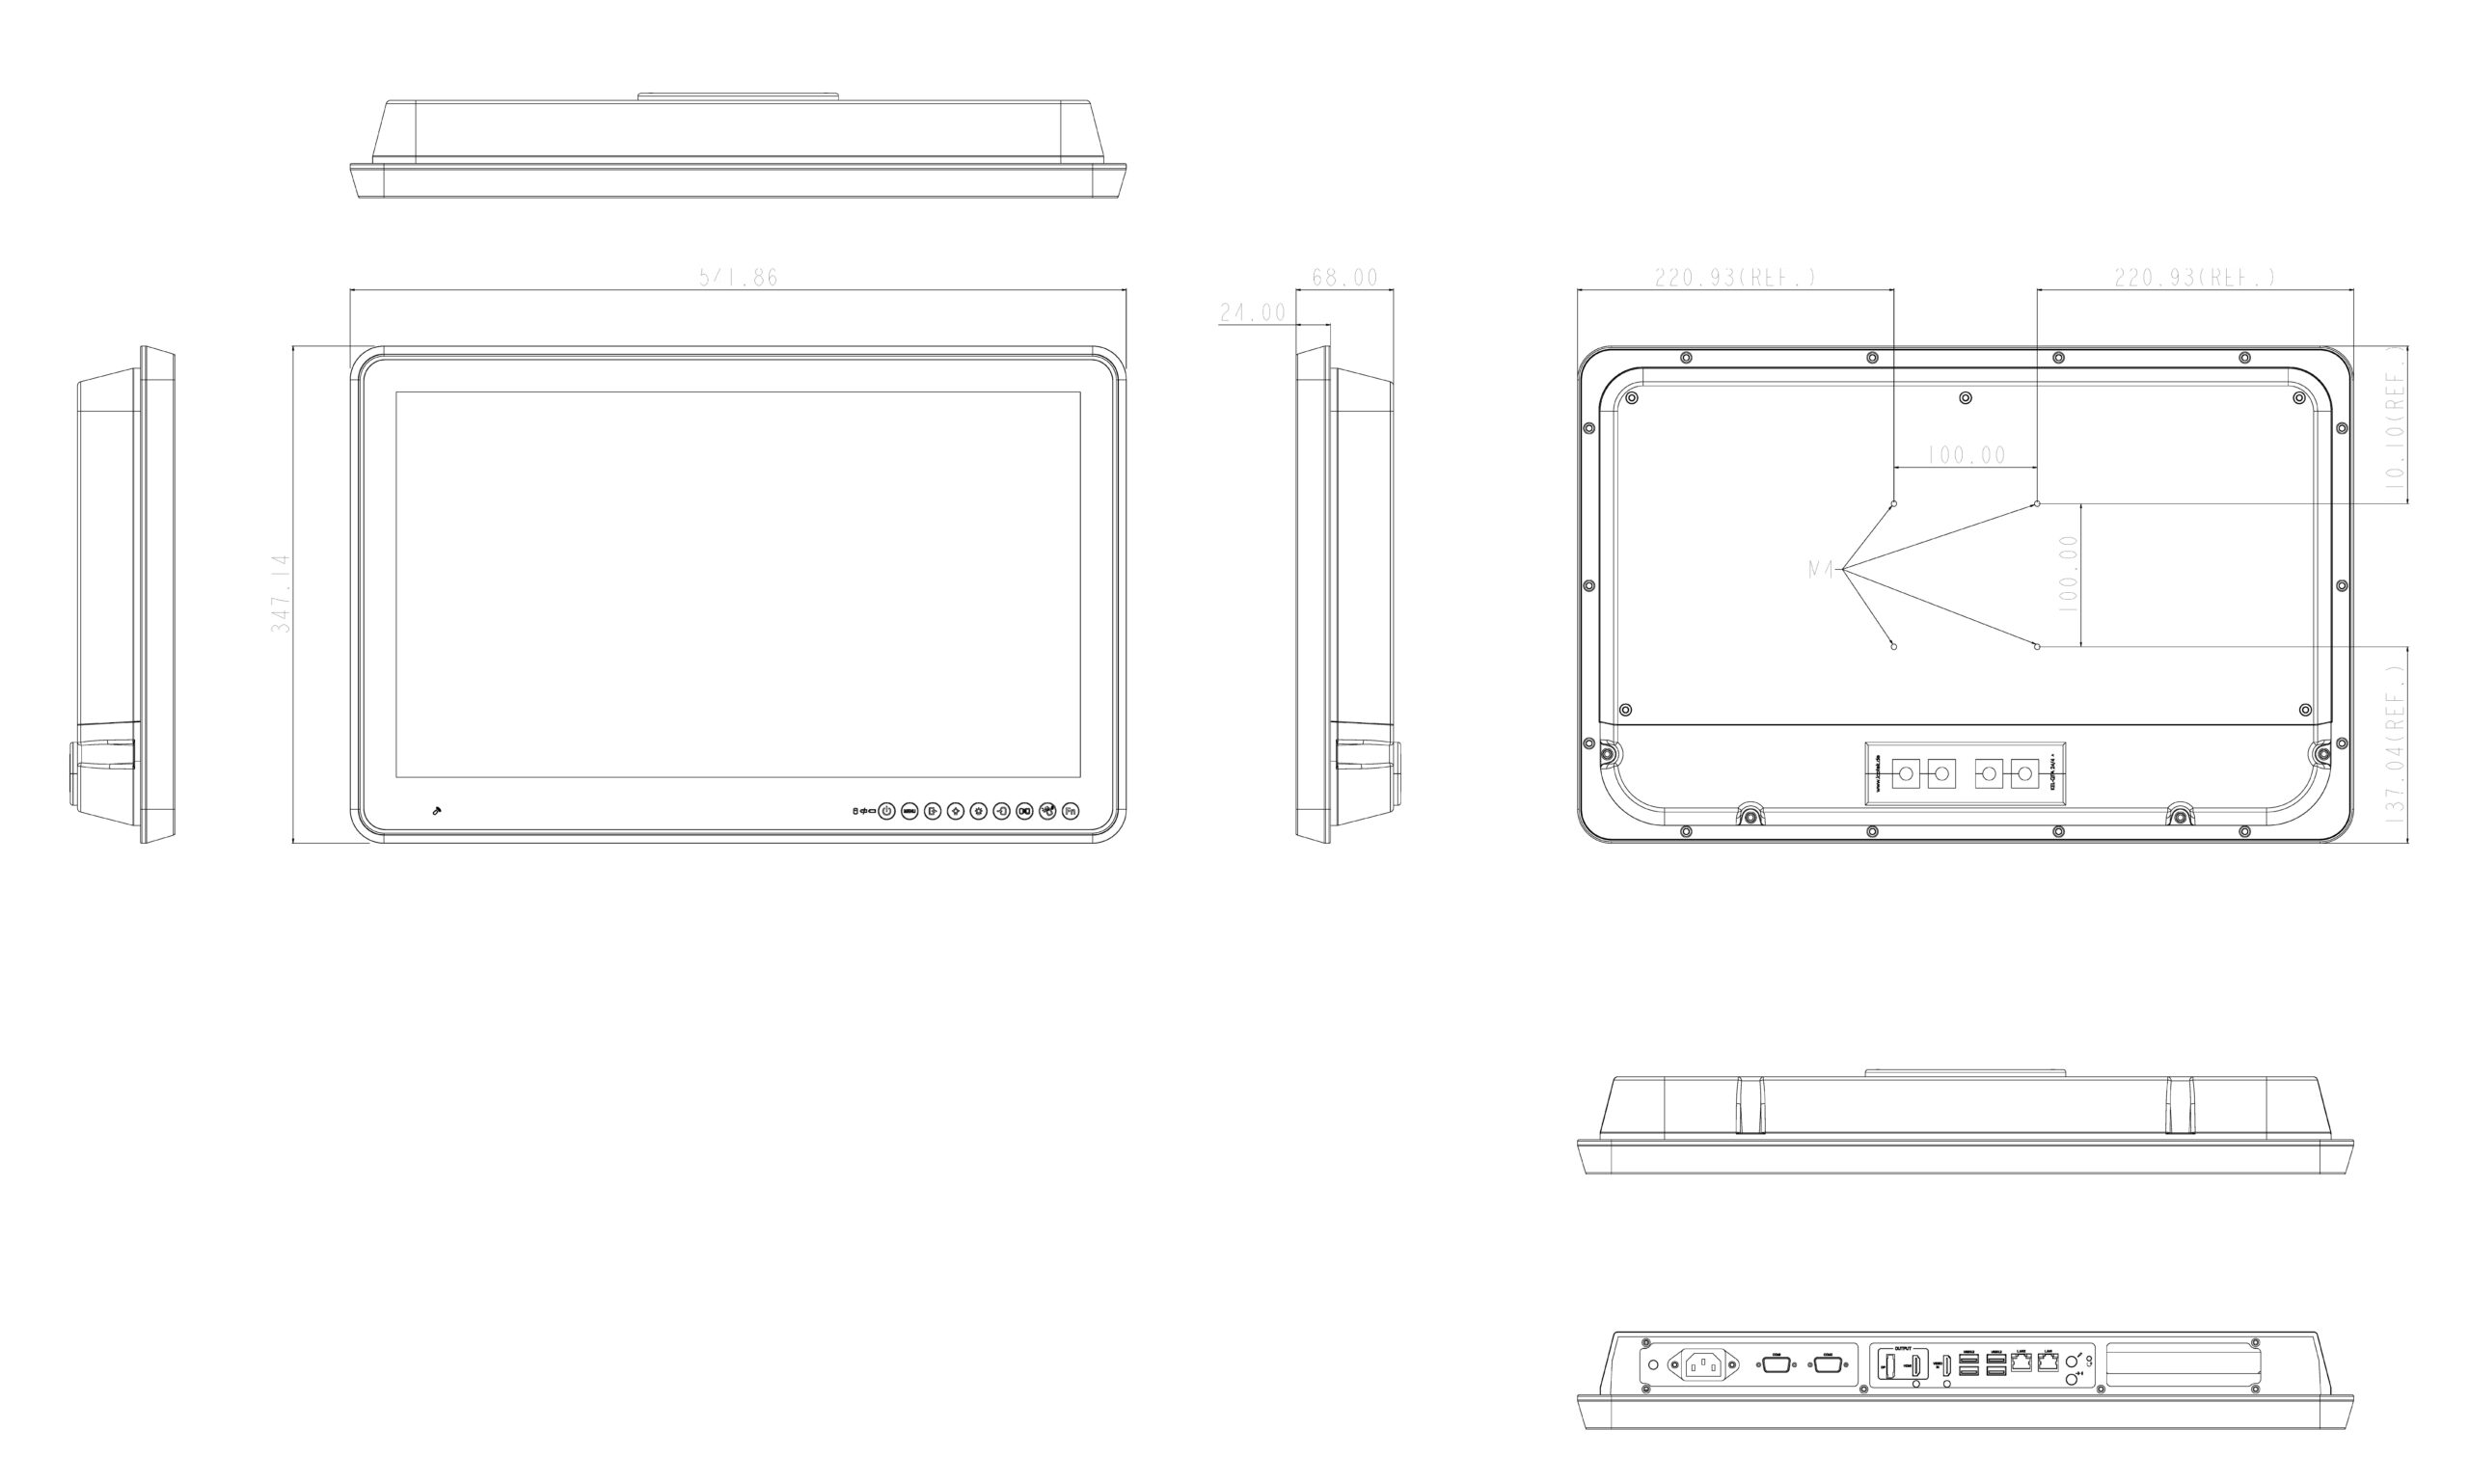 tm-7110-22 Technical Drawing